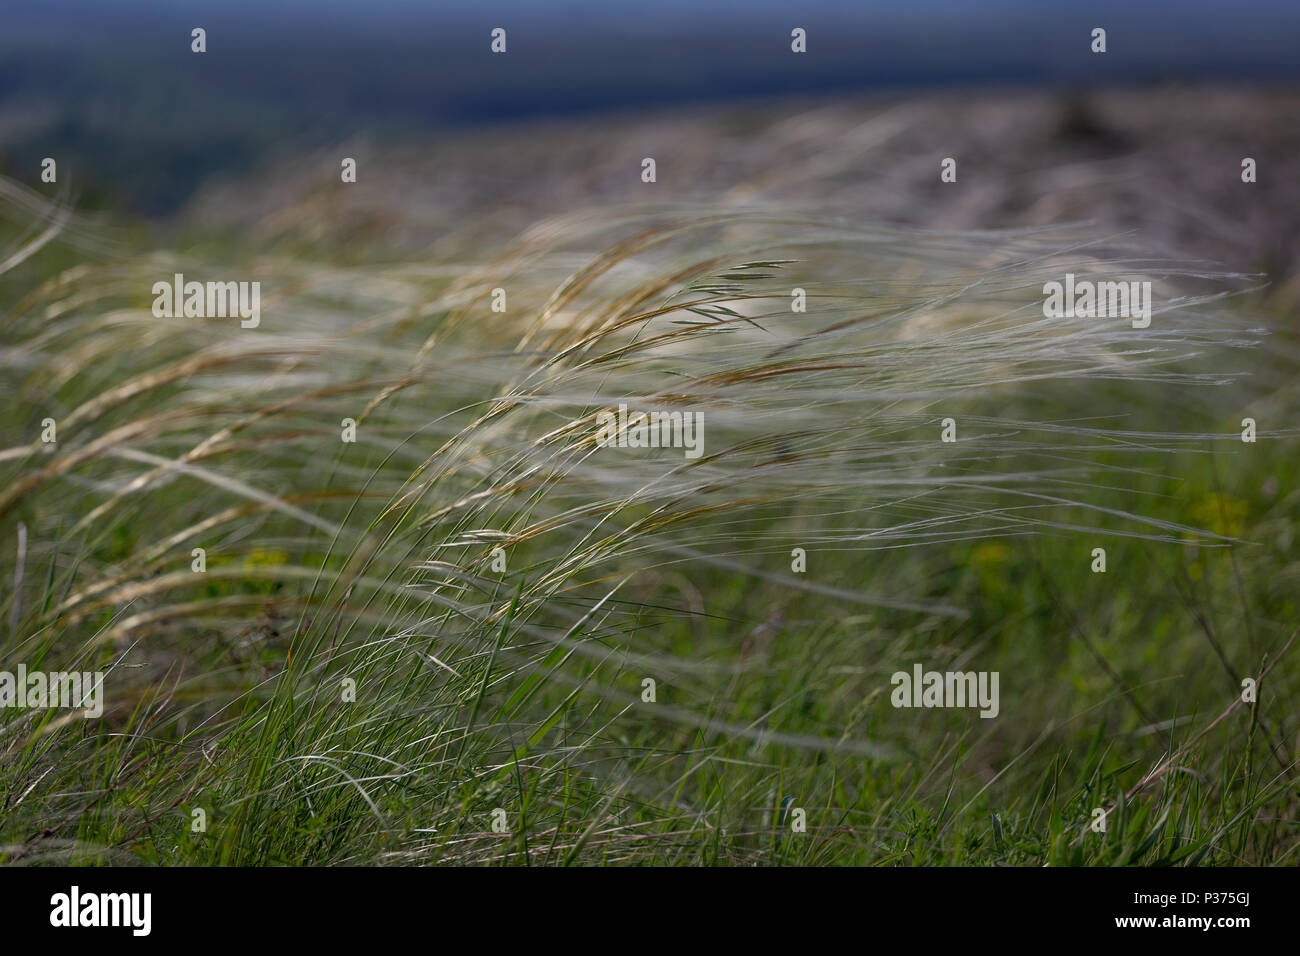 feather grass is listed in the red book. field with feather grass Stock Photo